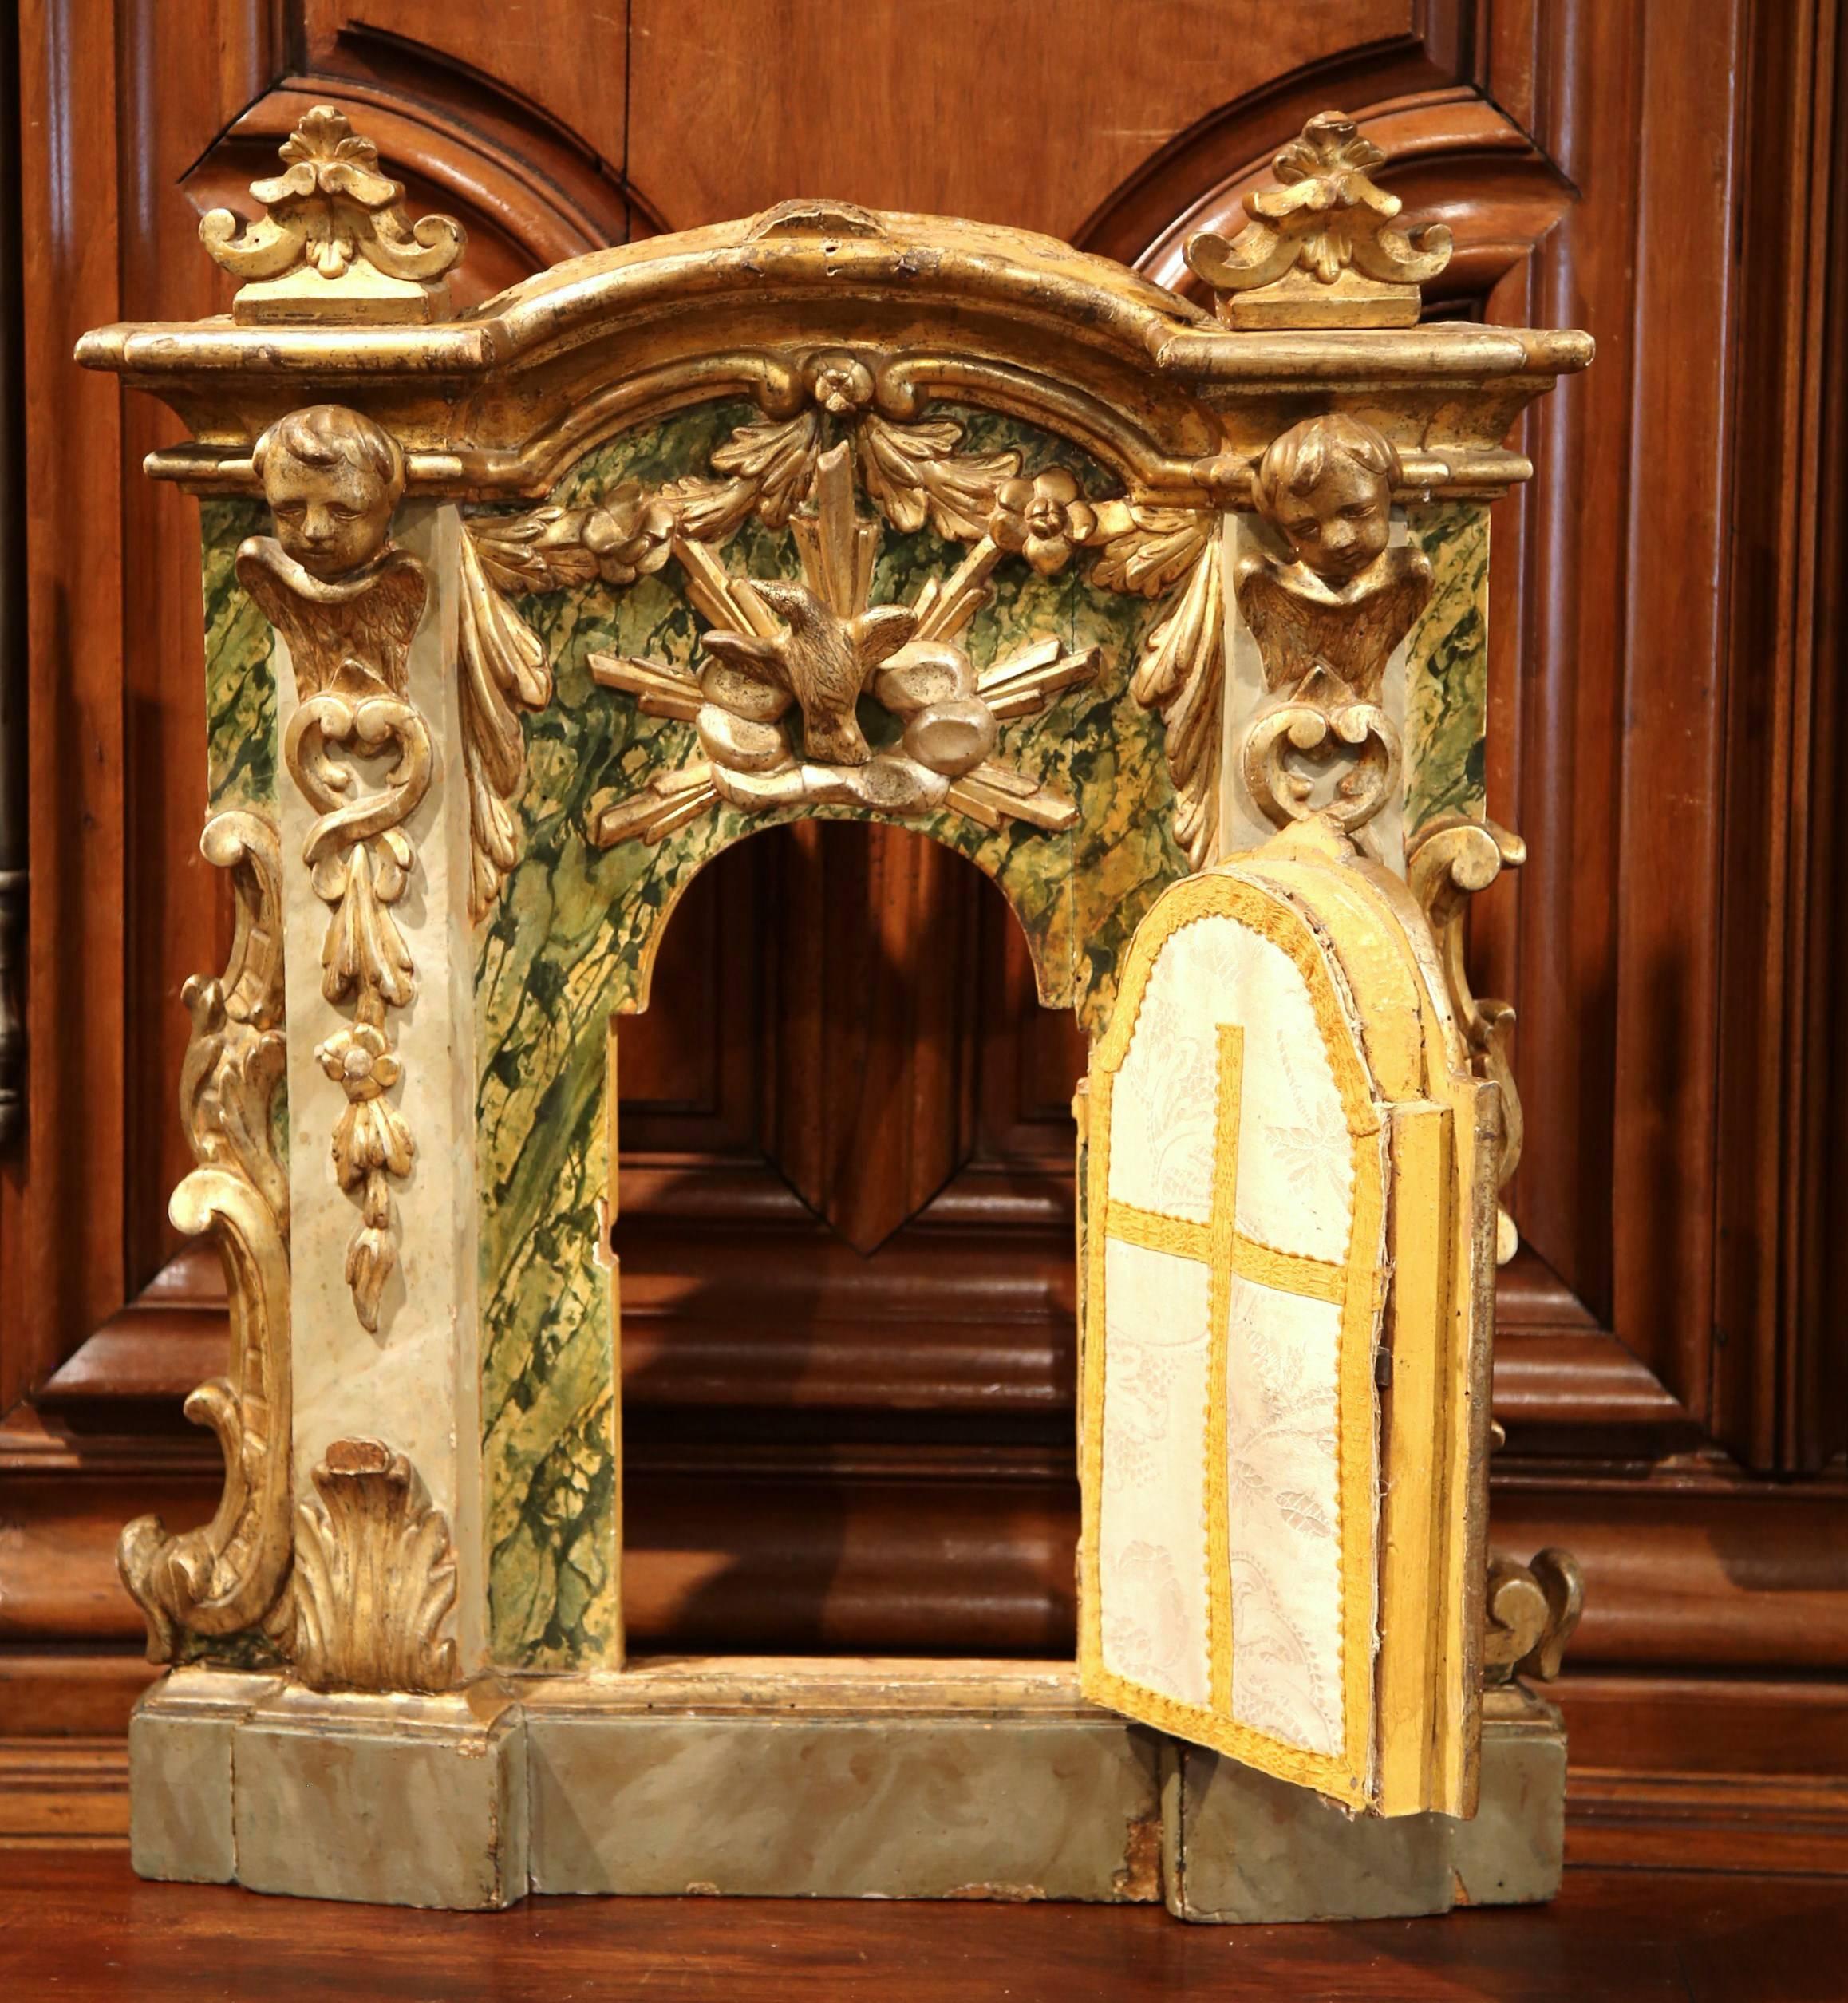 Hand-Carved 18th Century Italian Carved Giltwood and Polychrome Tabernacle Facade with Door